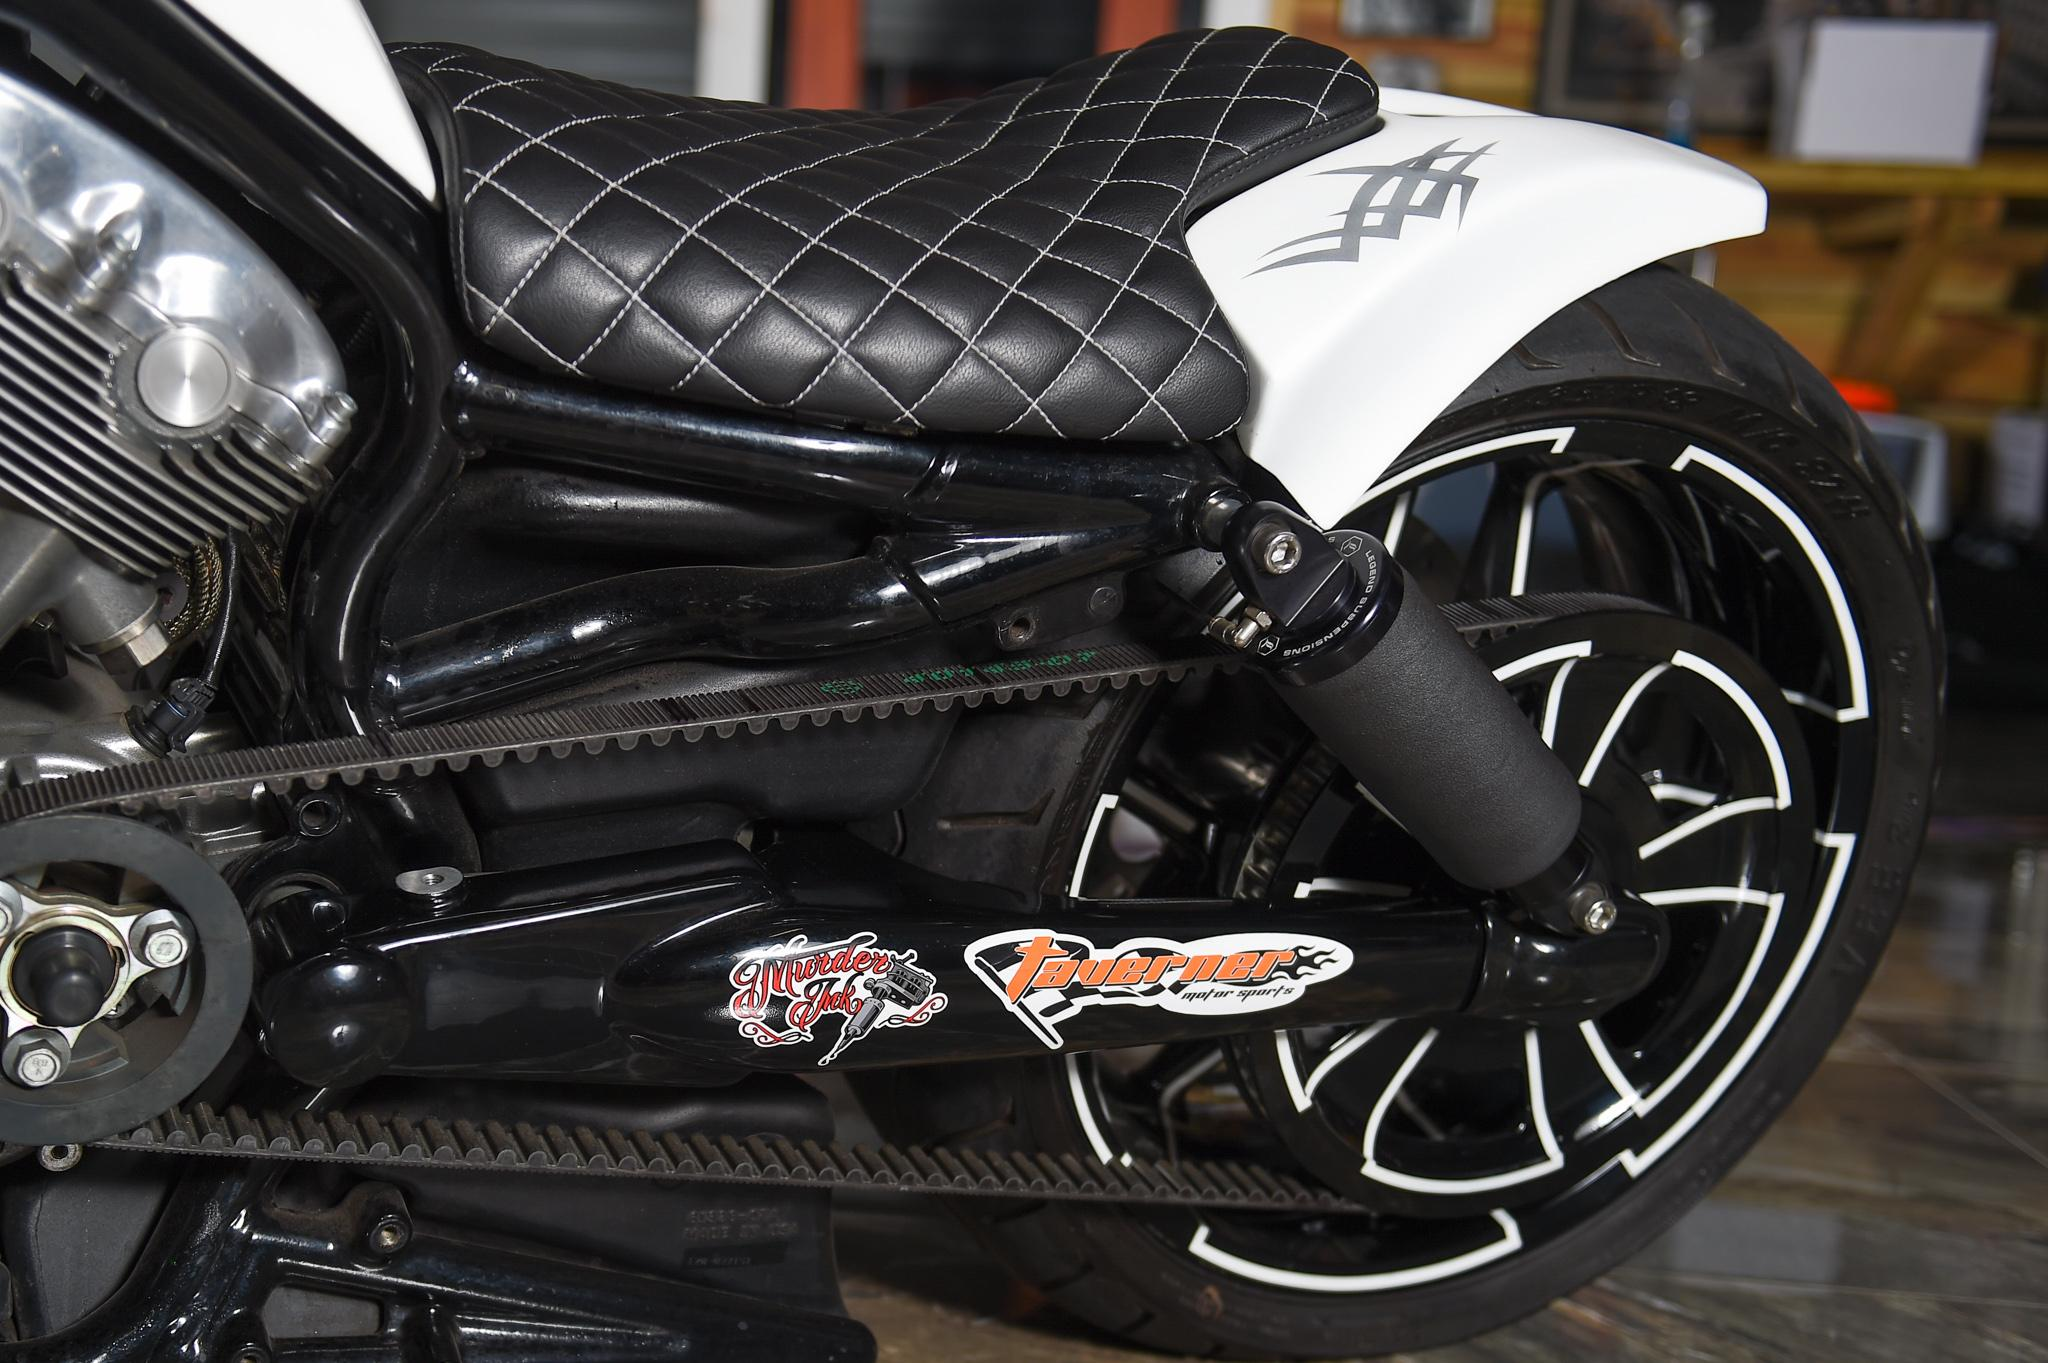 Custom motorcycle parts and accessories